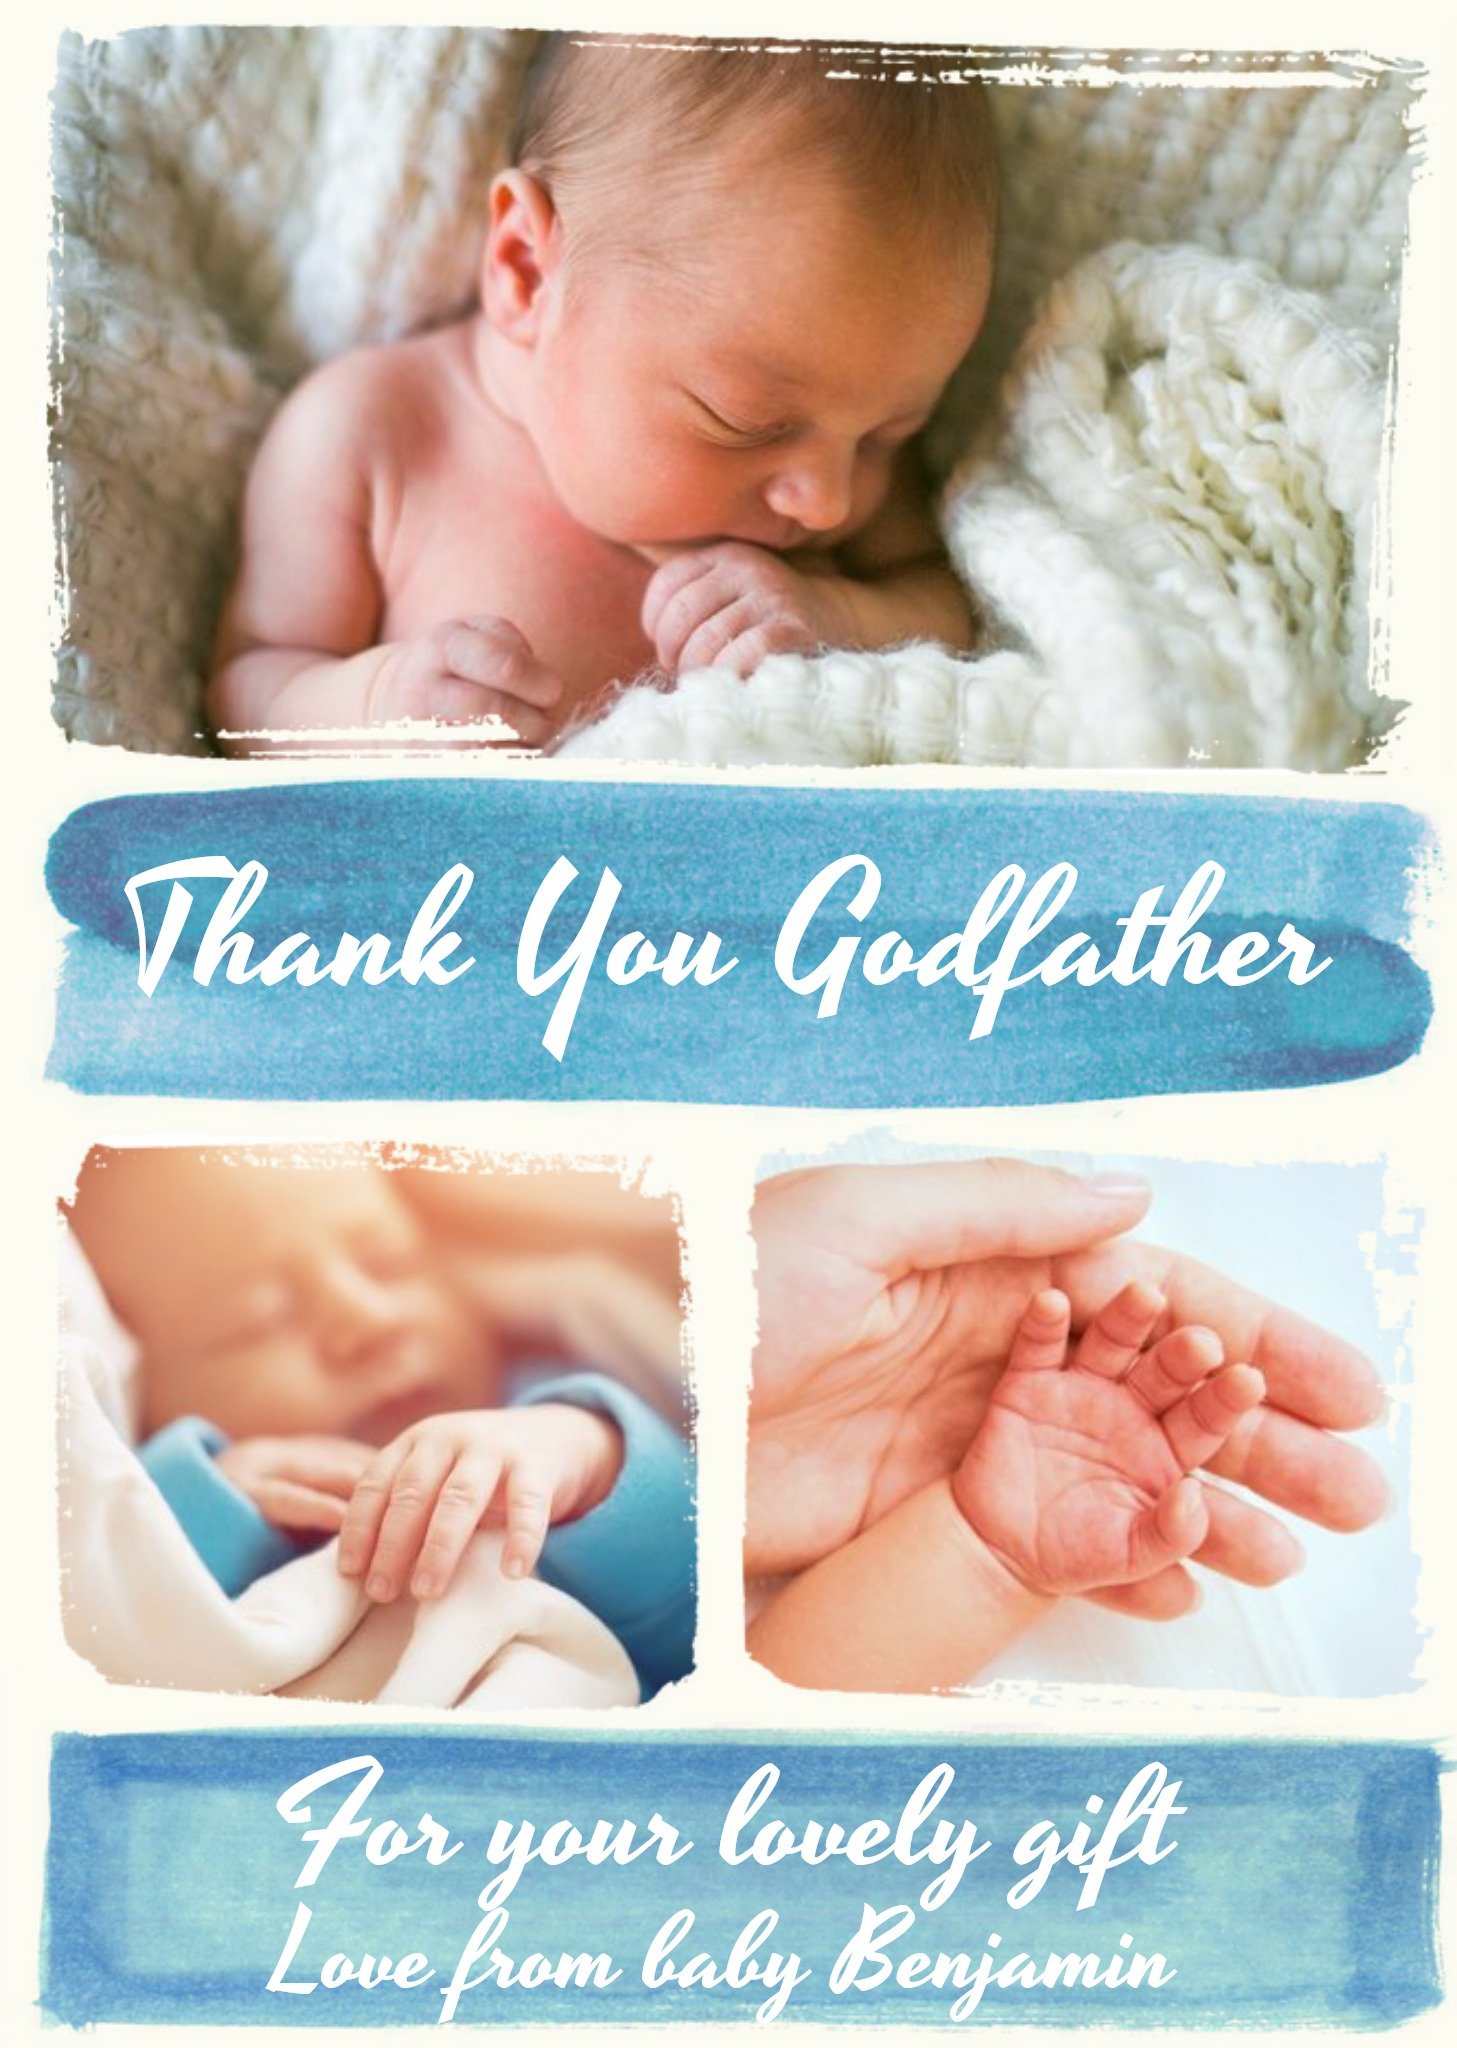 Moonpig Thank You For The Gift Godfather Photo Upload Card Ecard